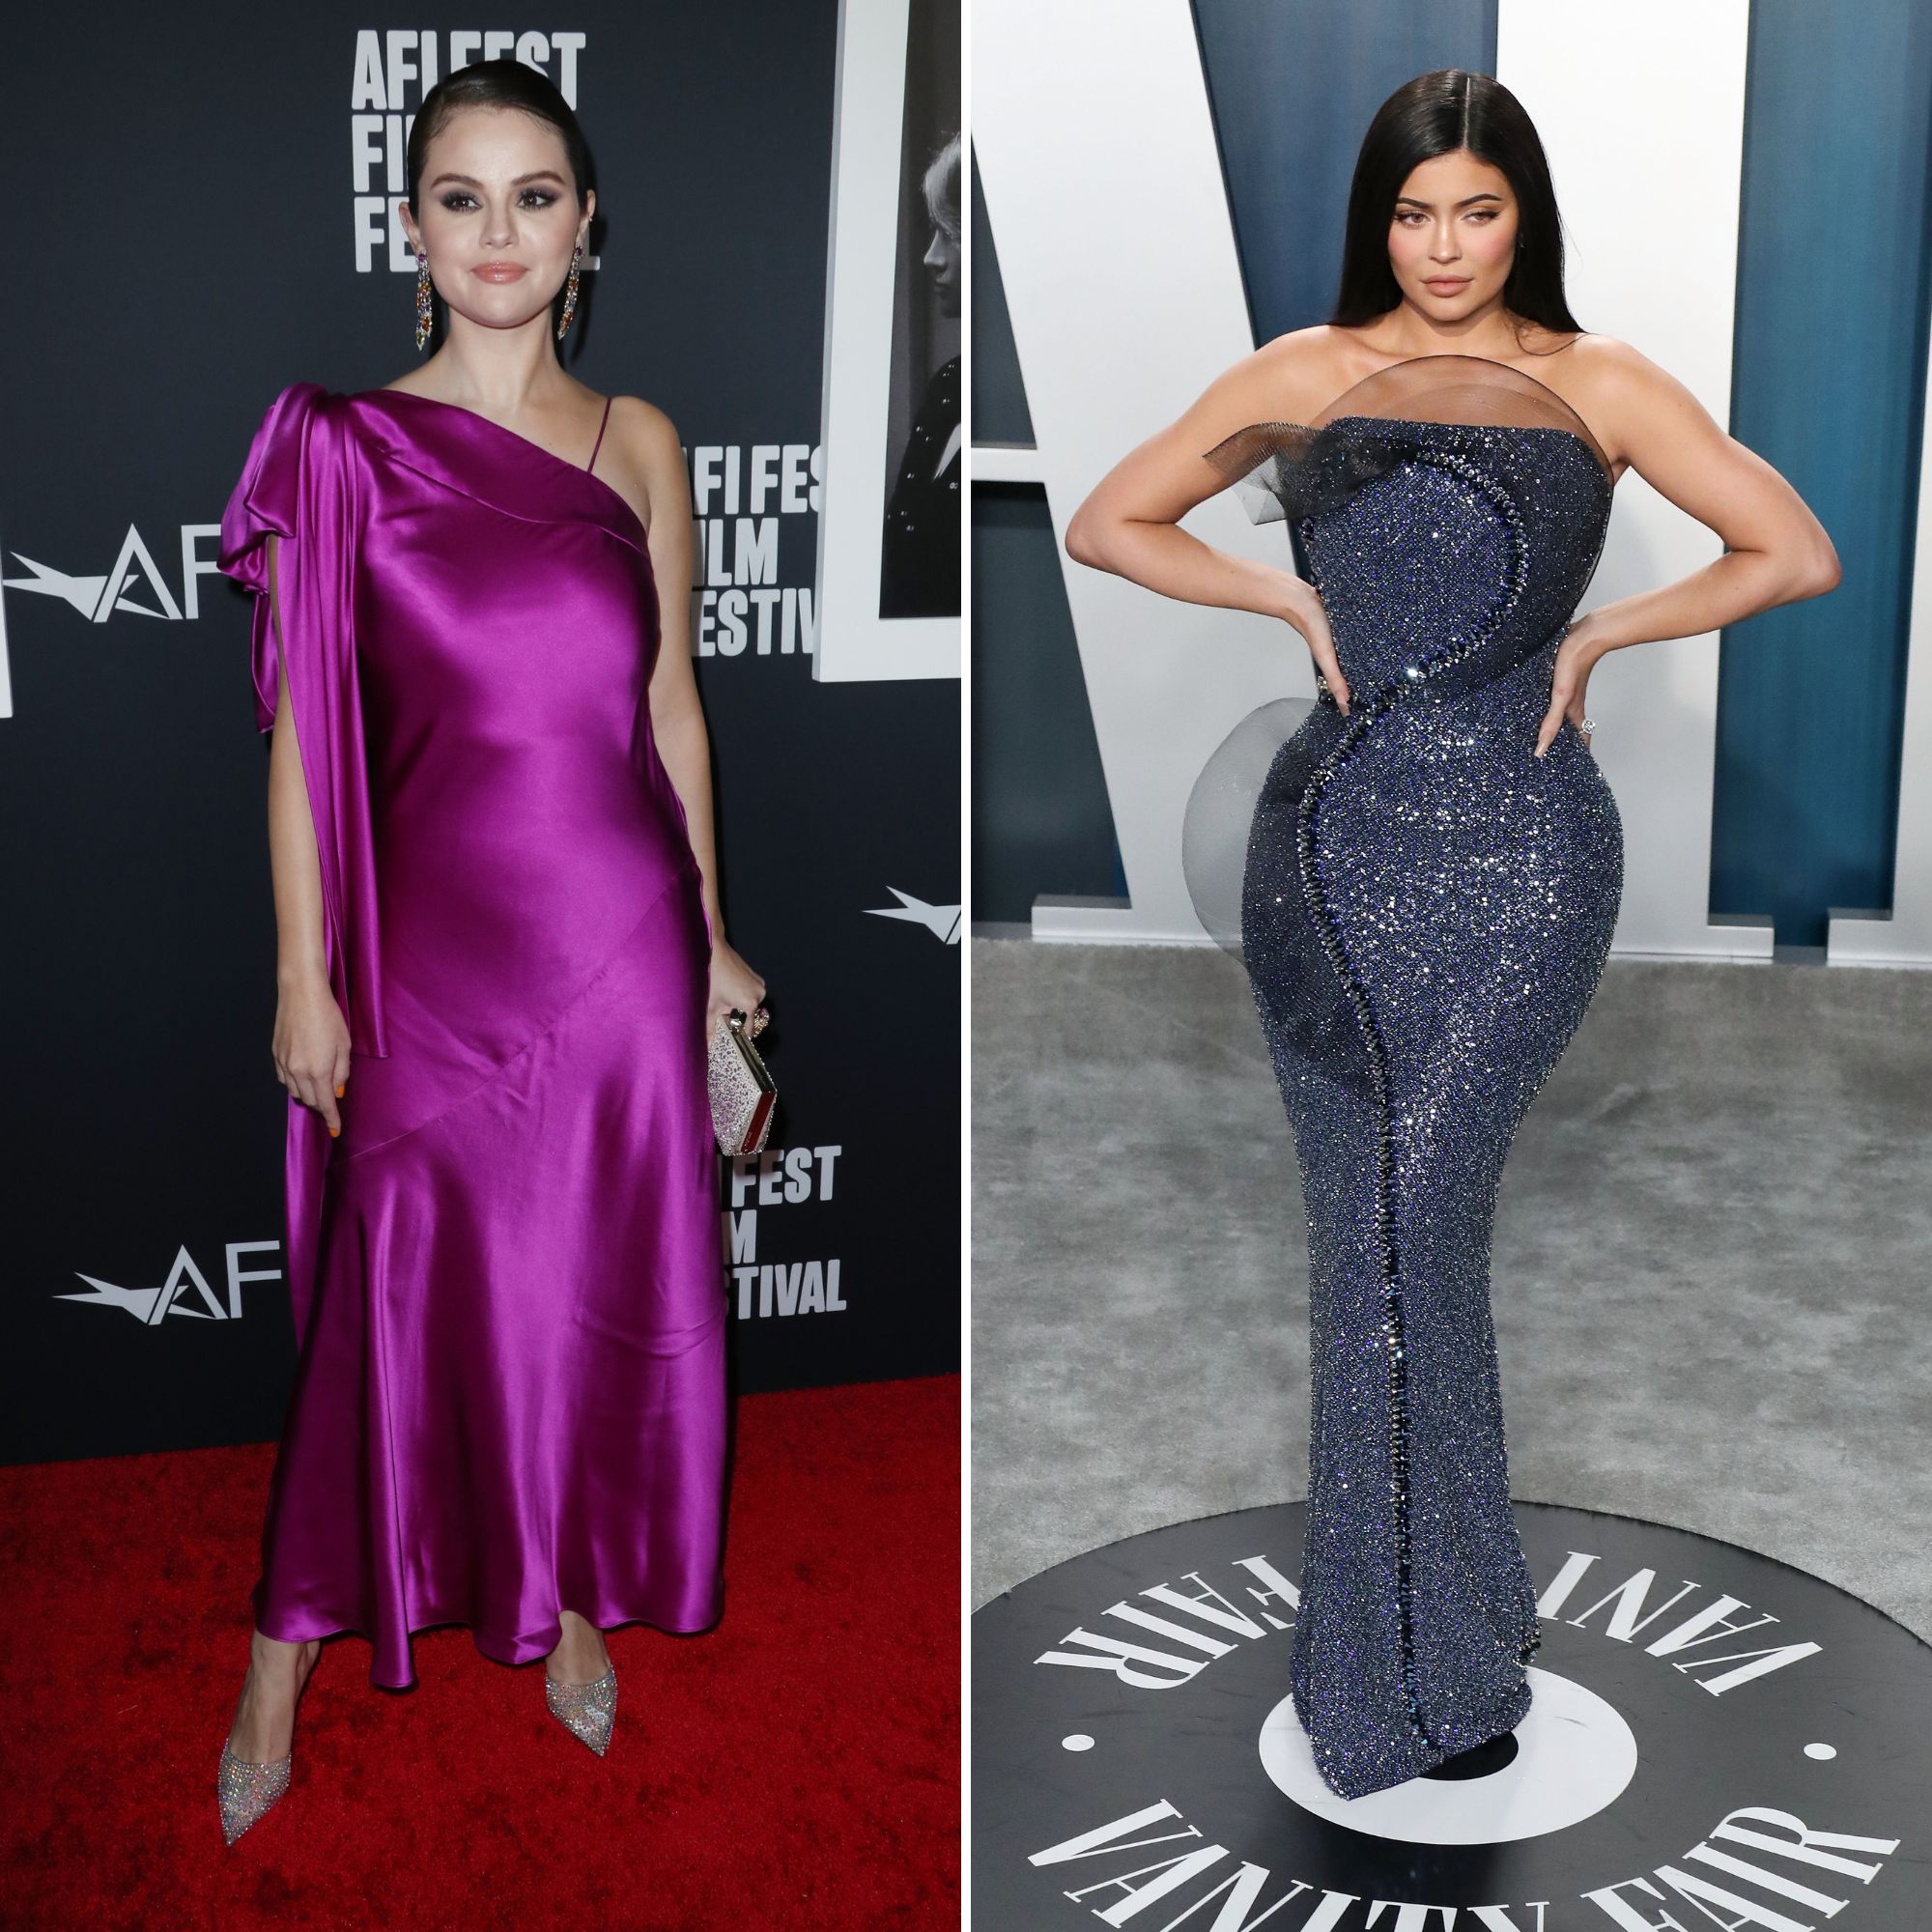 Selena Gomez and Kylie Jenner Join Forces to Deny Feud Rumors